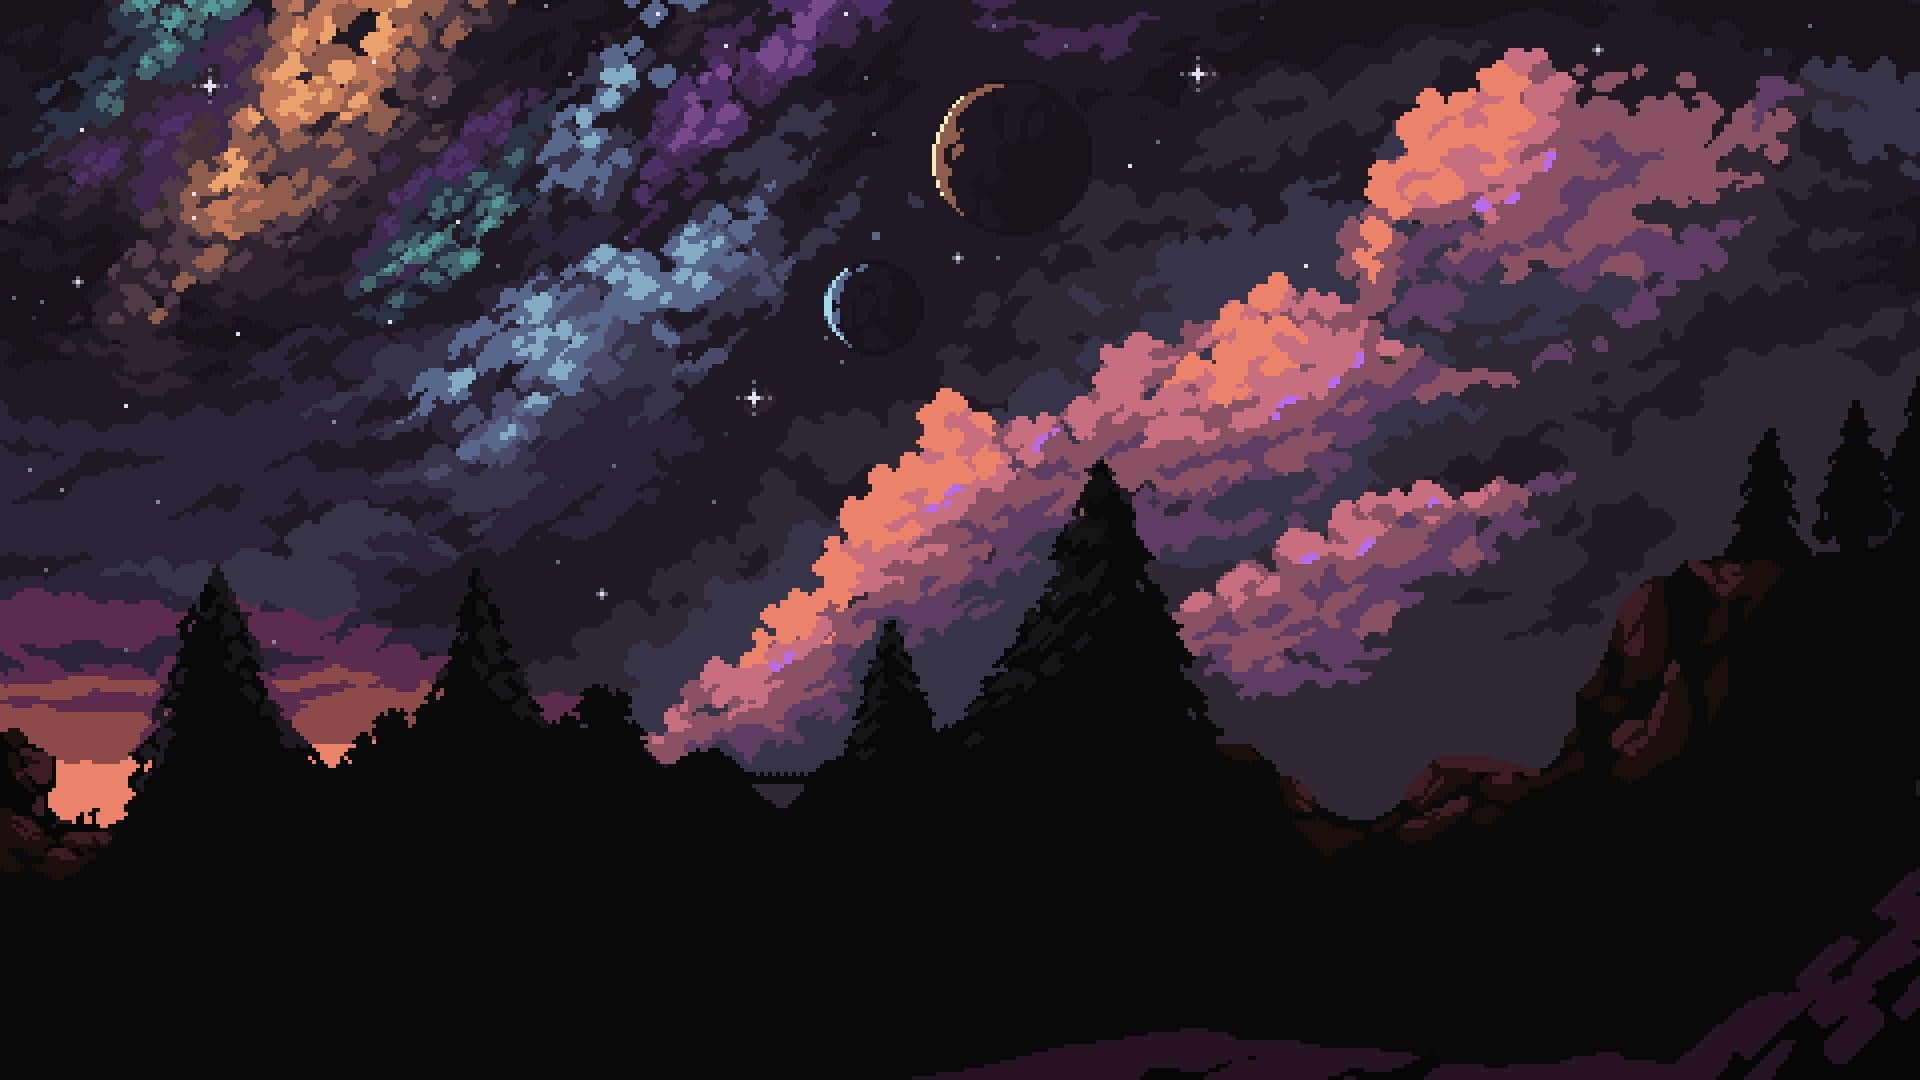 Download Aesthetic Pixel Art Of Planets At Night Wallpaper